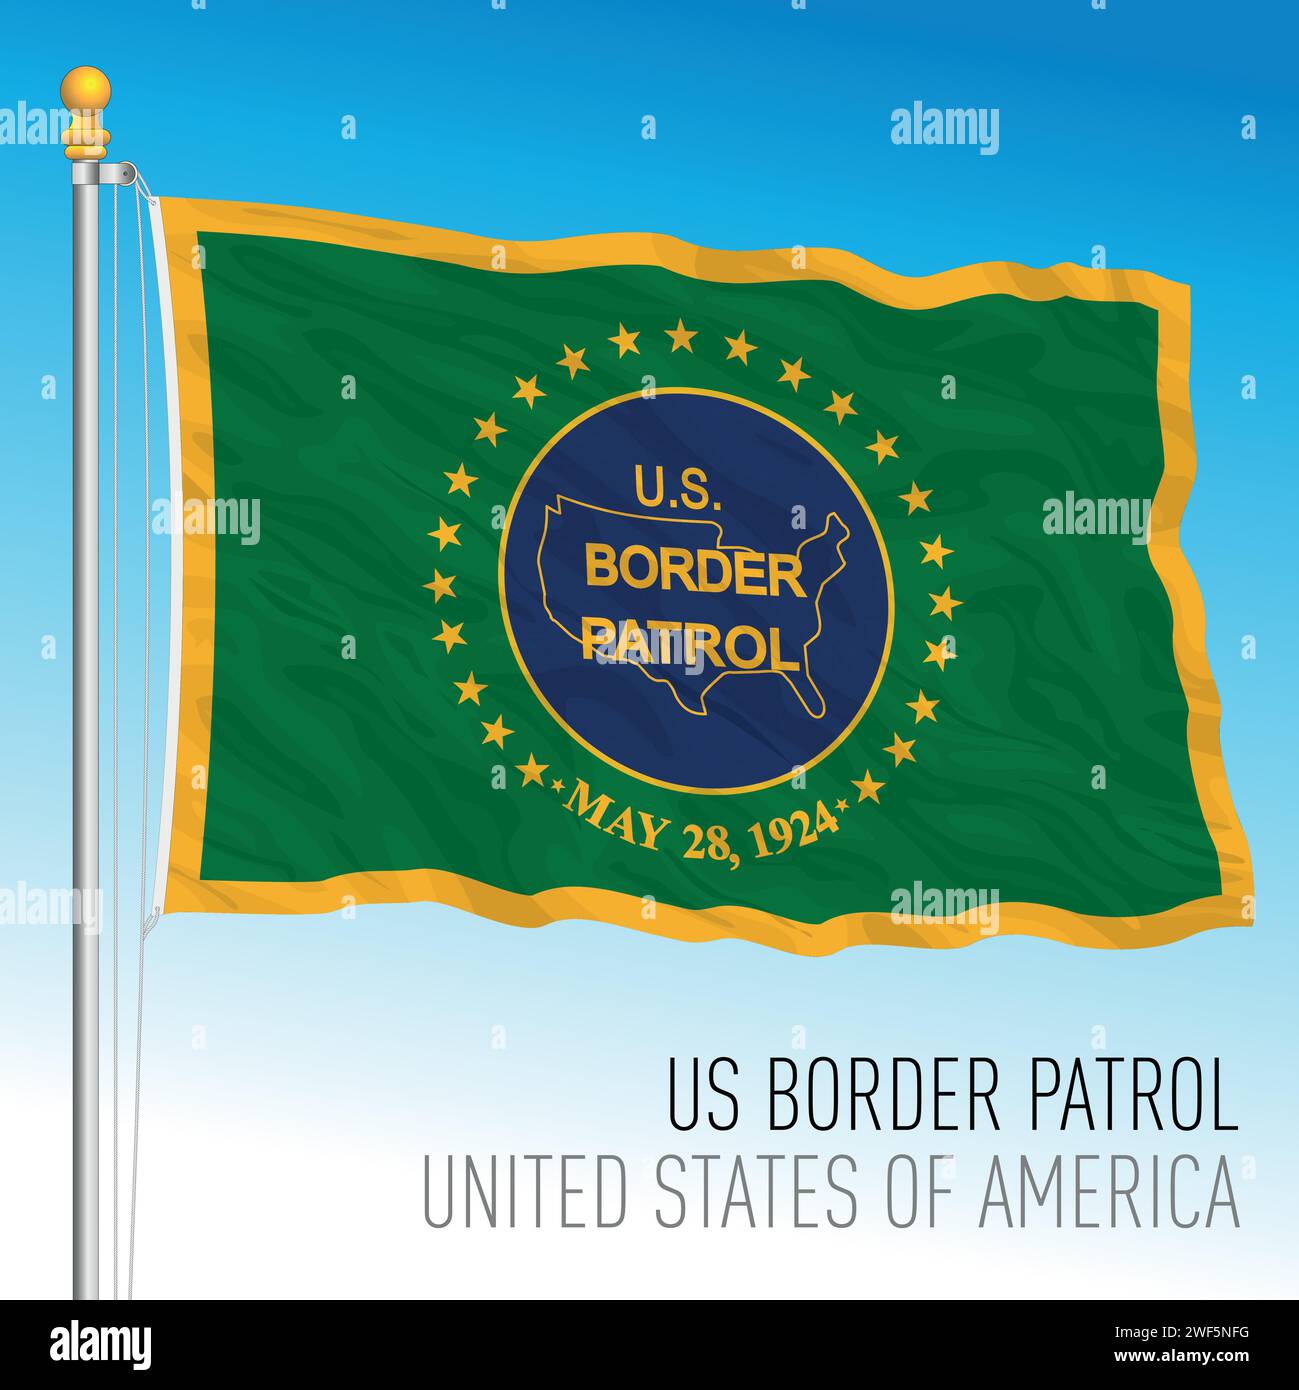 US Border Patrol waving flag with seal, United States of America, vector illustration Stock Vector